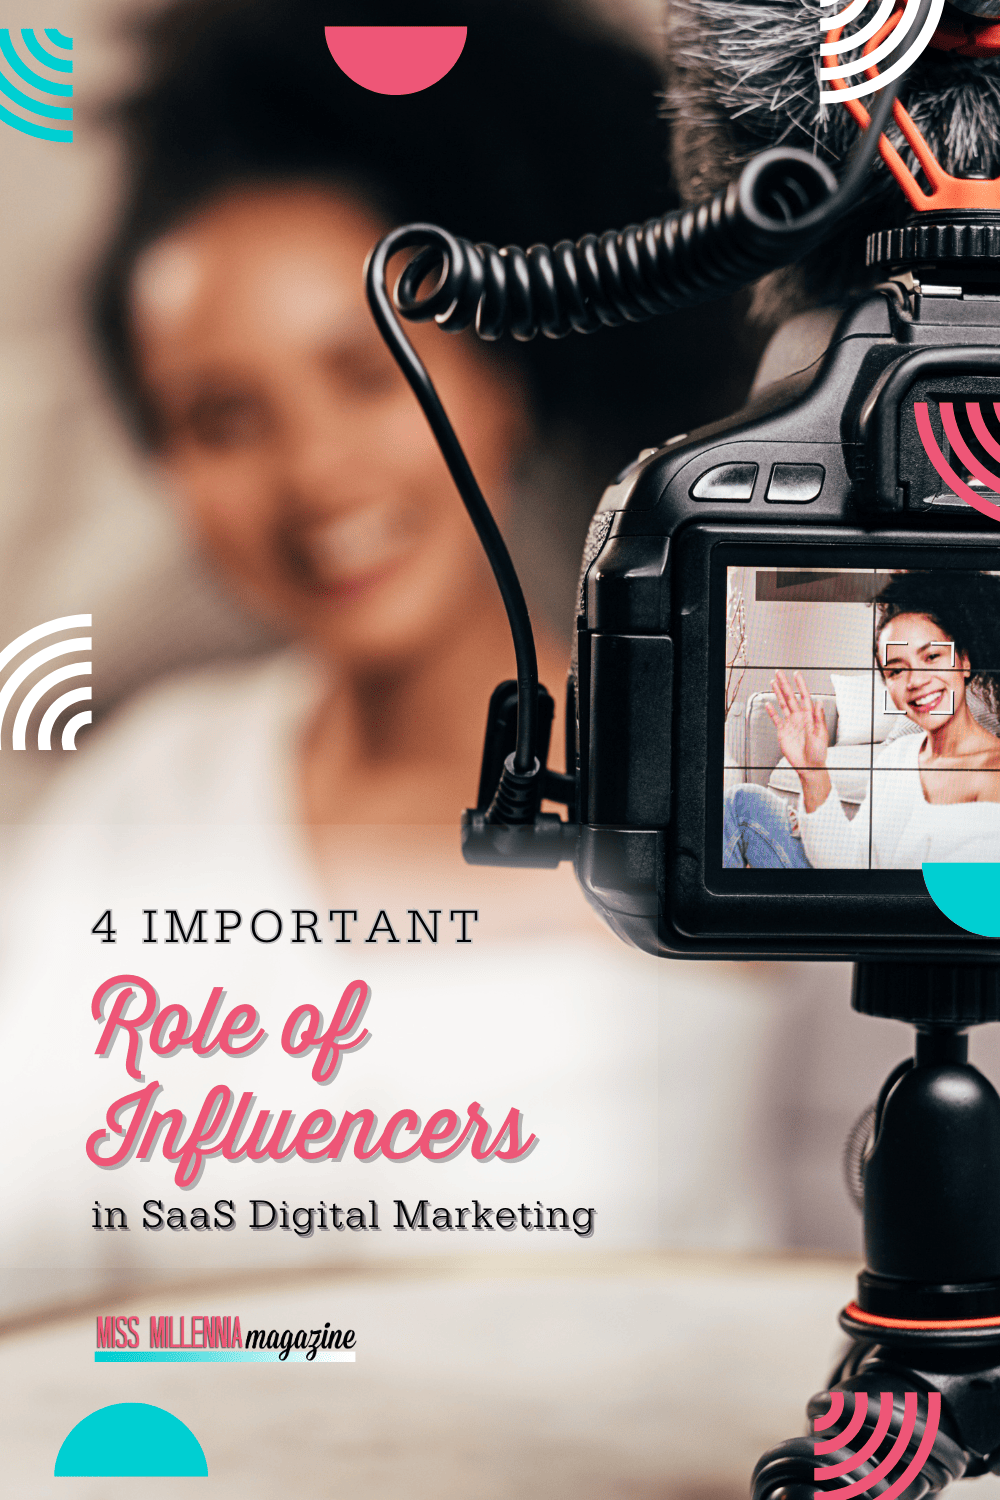 4 Important Role of Influencers in SaaS Digital Marketing